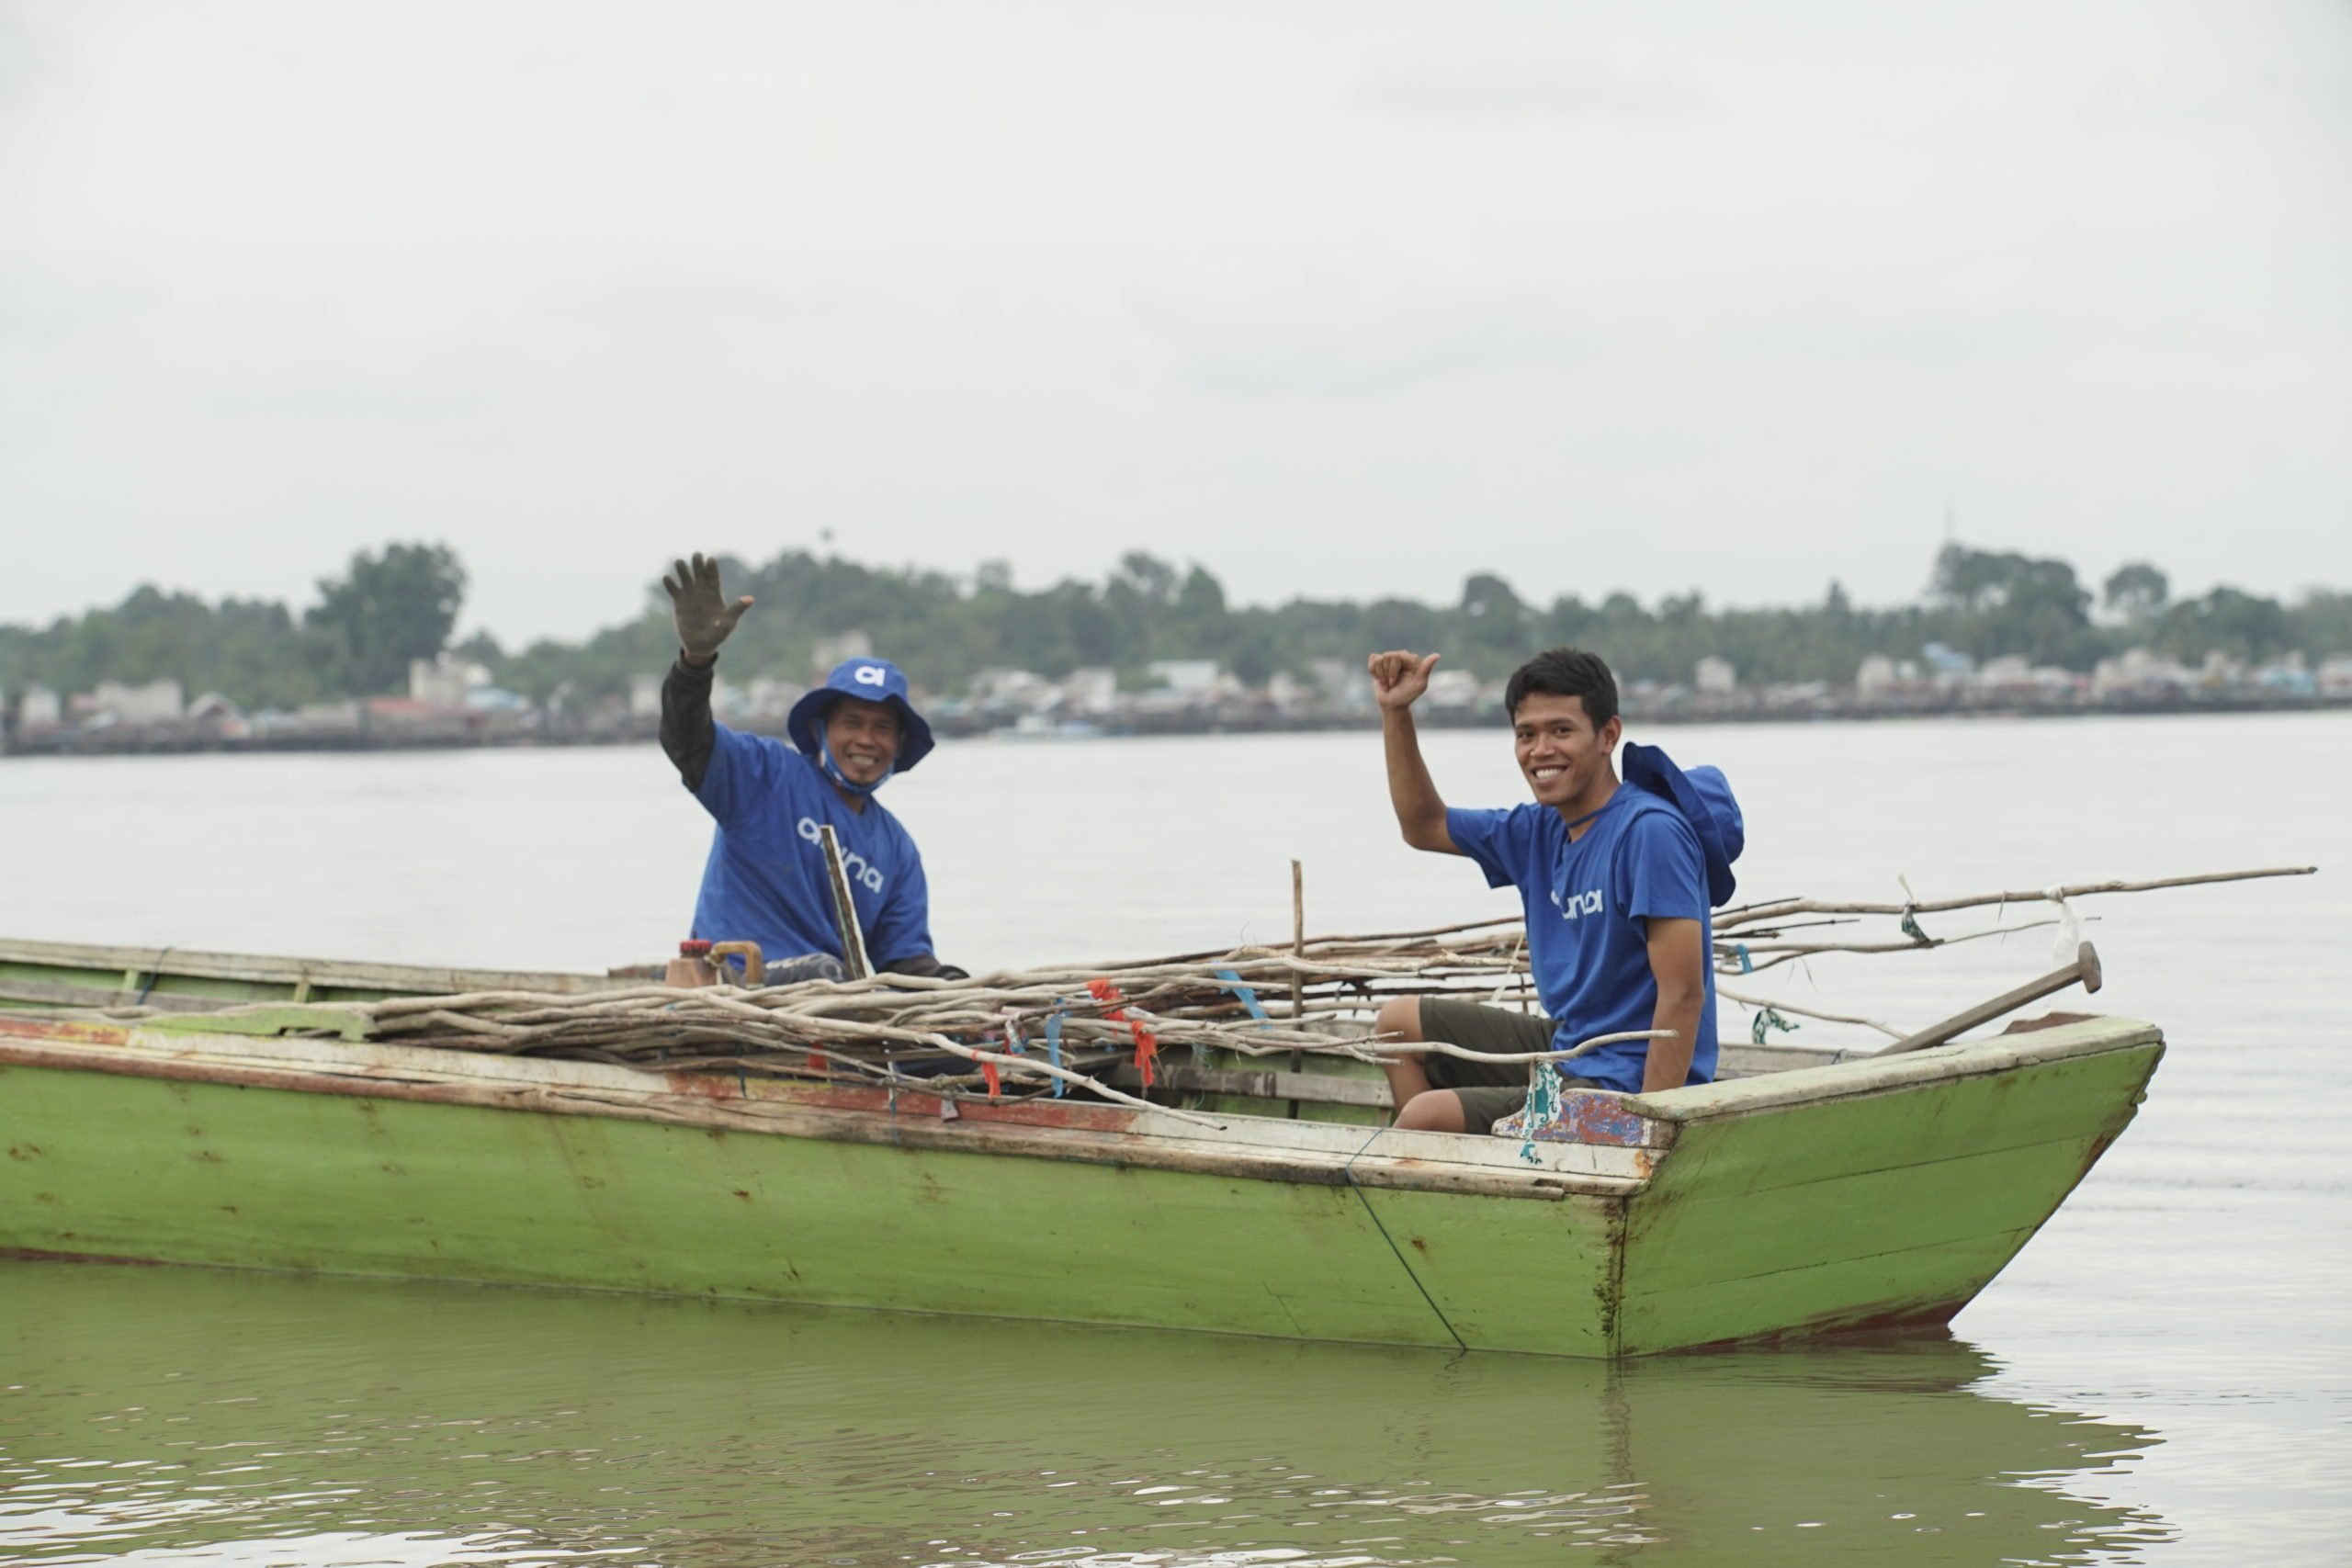 Indonesian fishery startup Aruna raises $35m Series A led by Prosus, East Ventures